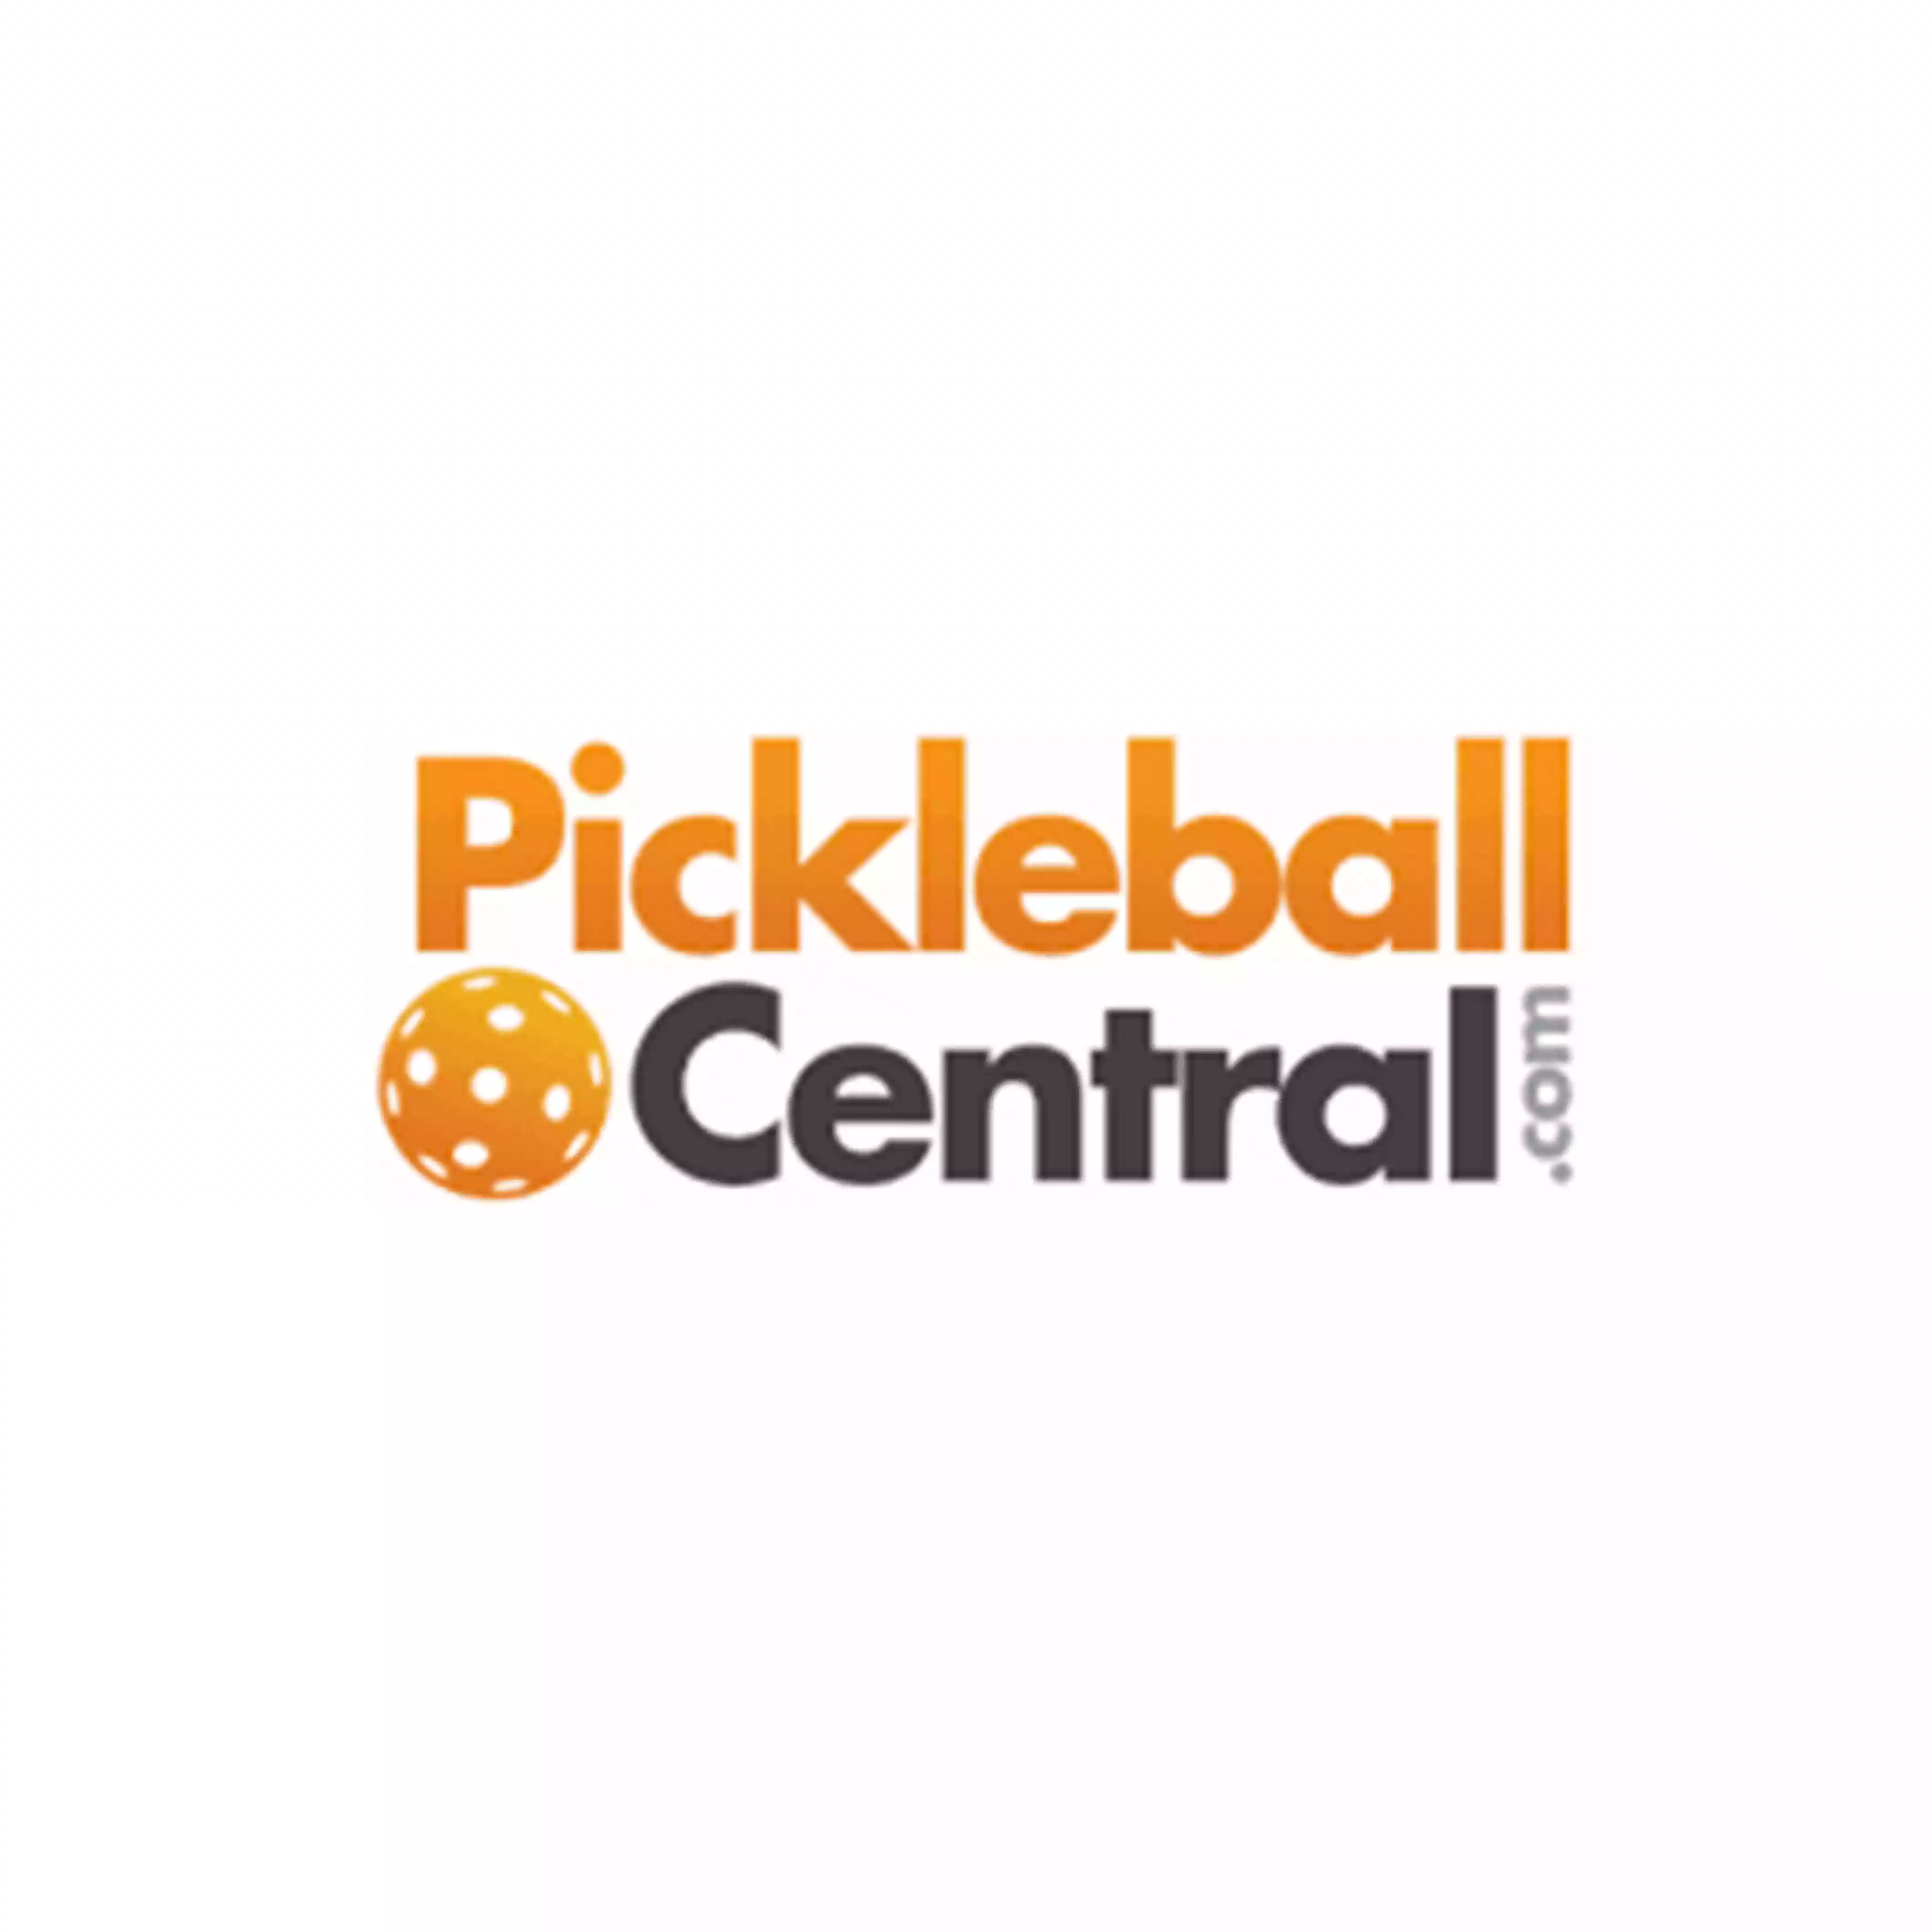 Pickleball Central coupon codes